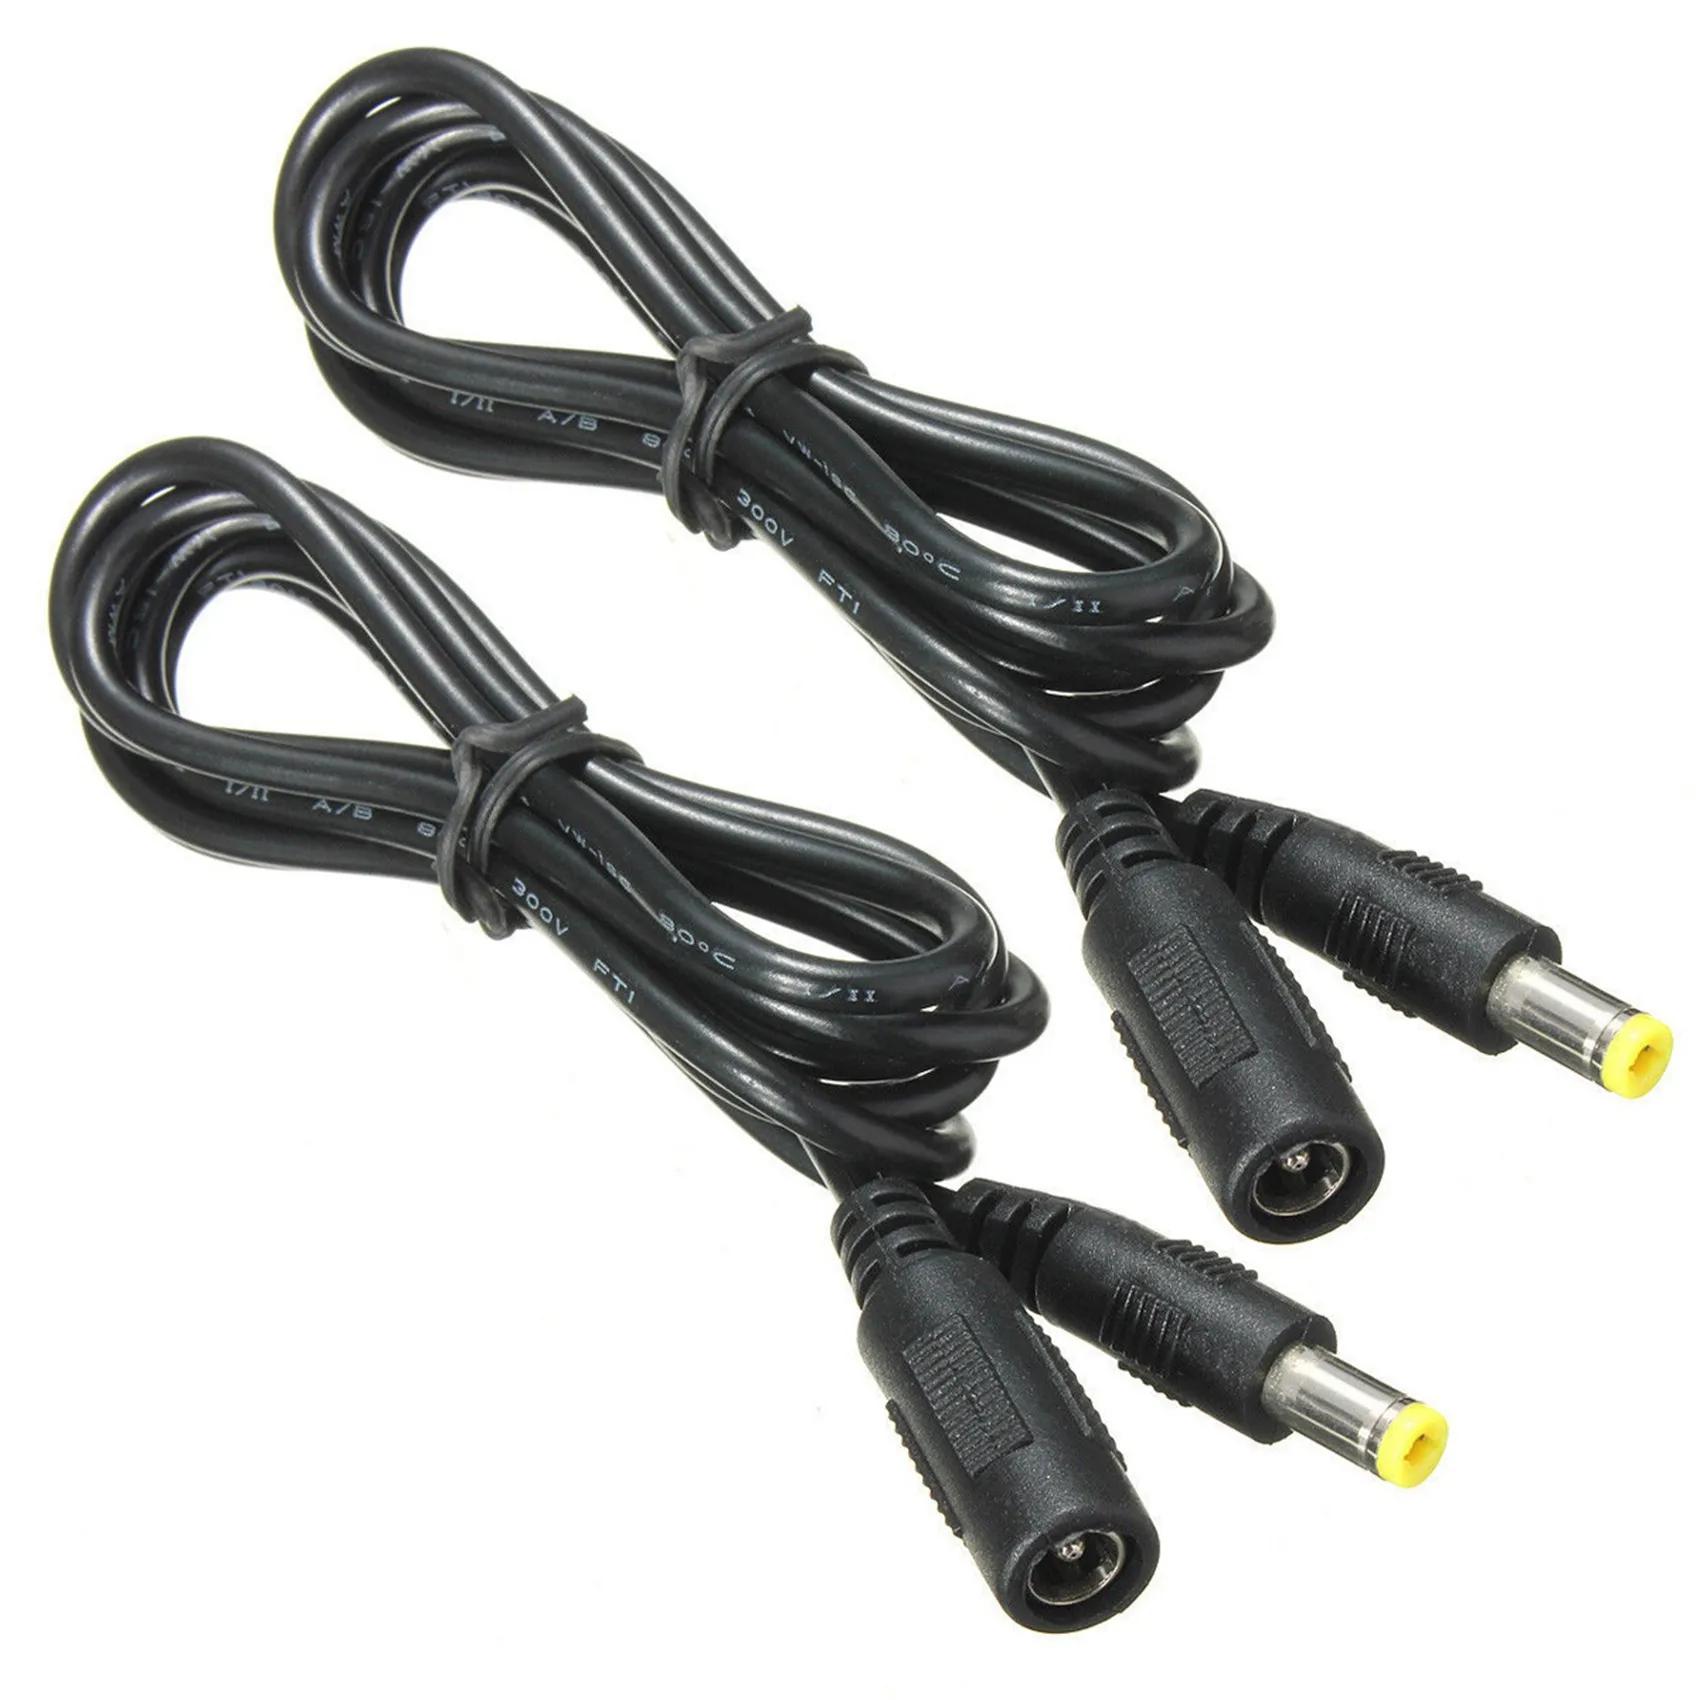 

2X 5.5mm x 2.1mm DC Power Jack Male to Female Extension Cable Cord Lead ConnectorCable Length:1.2 M